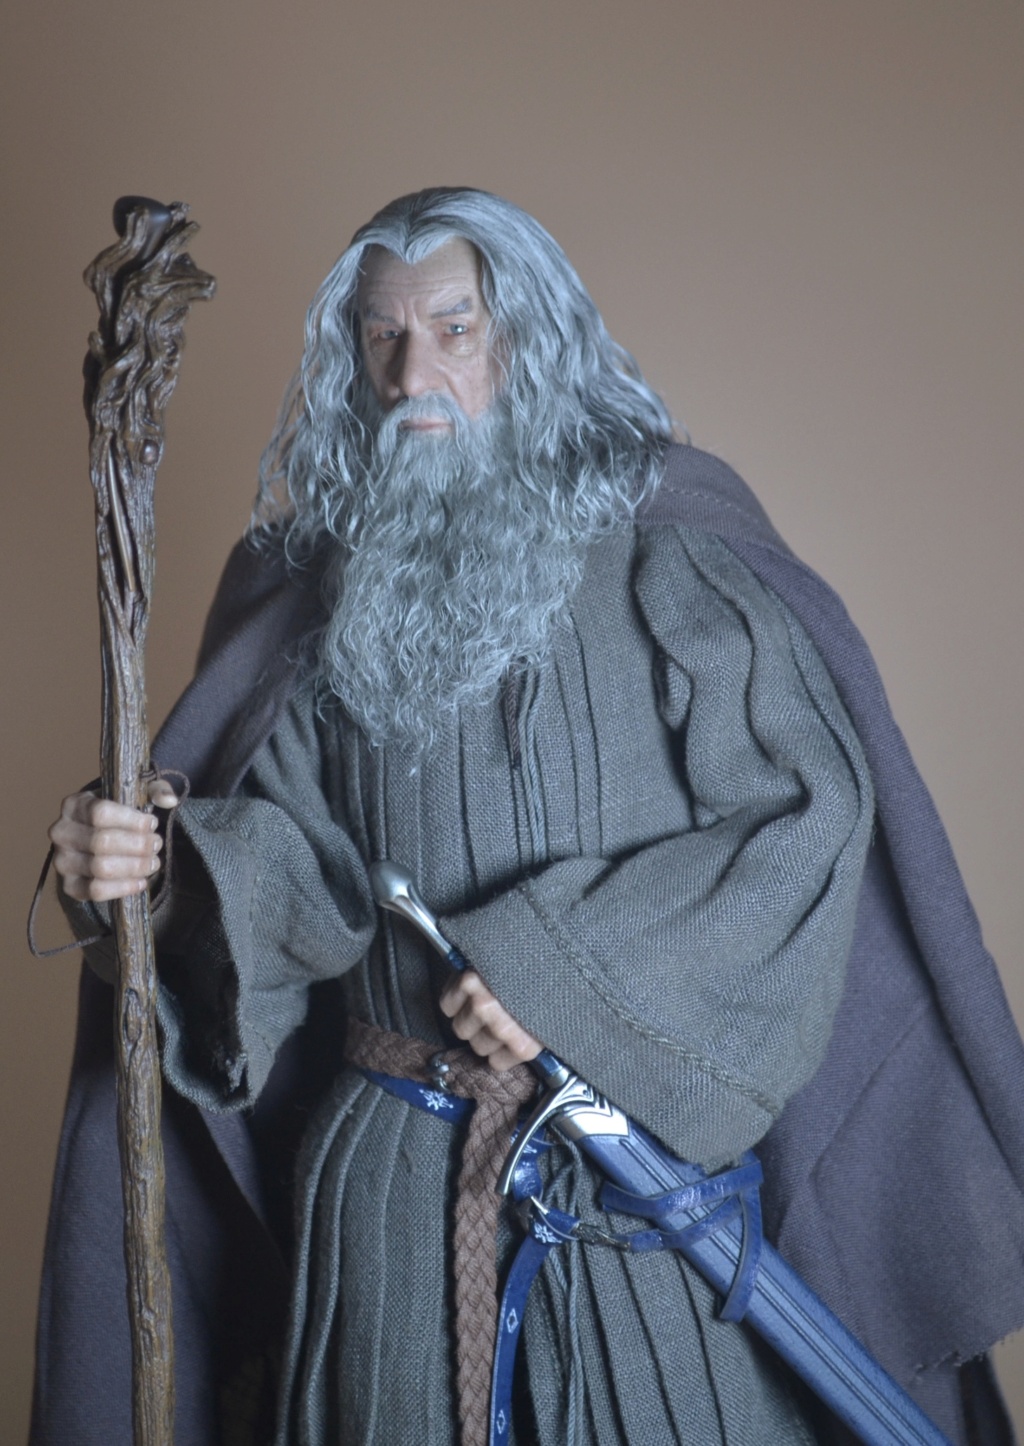 LordoftheRings - NEW PRODUCT: Queen Studios & INART: 1/6 The Lord of the Rings Gandalf (Grey Robe) Action Figure - Page 4 _dsc3925